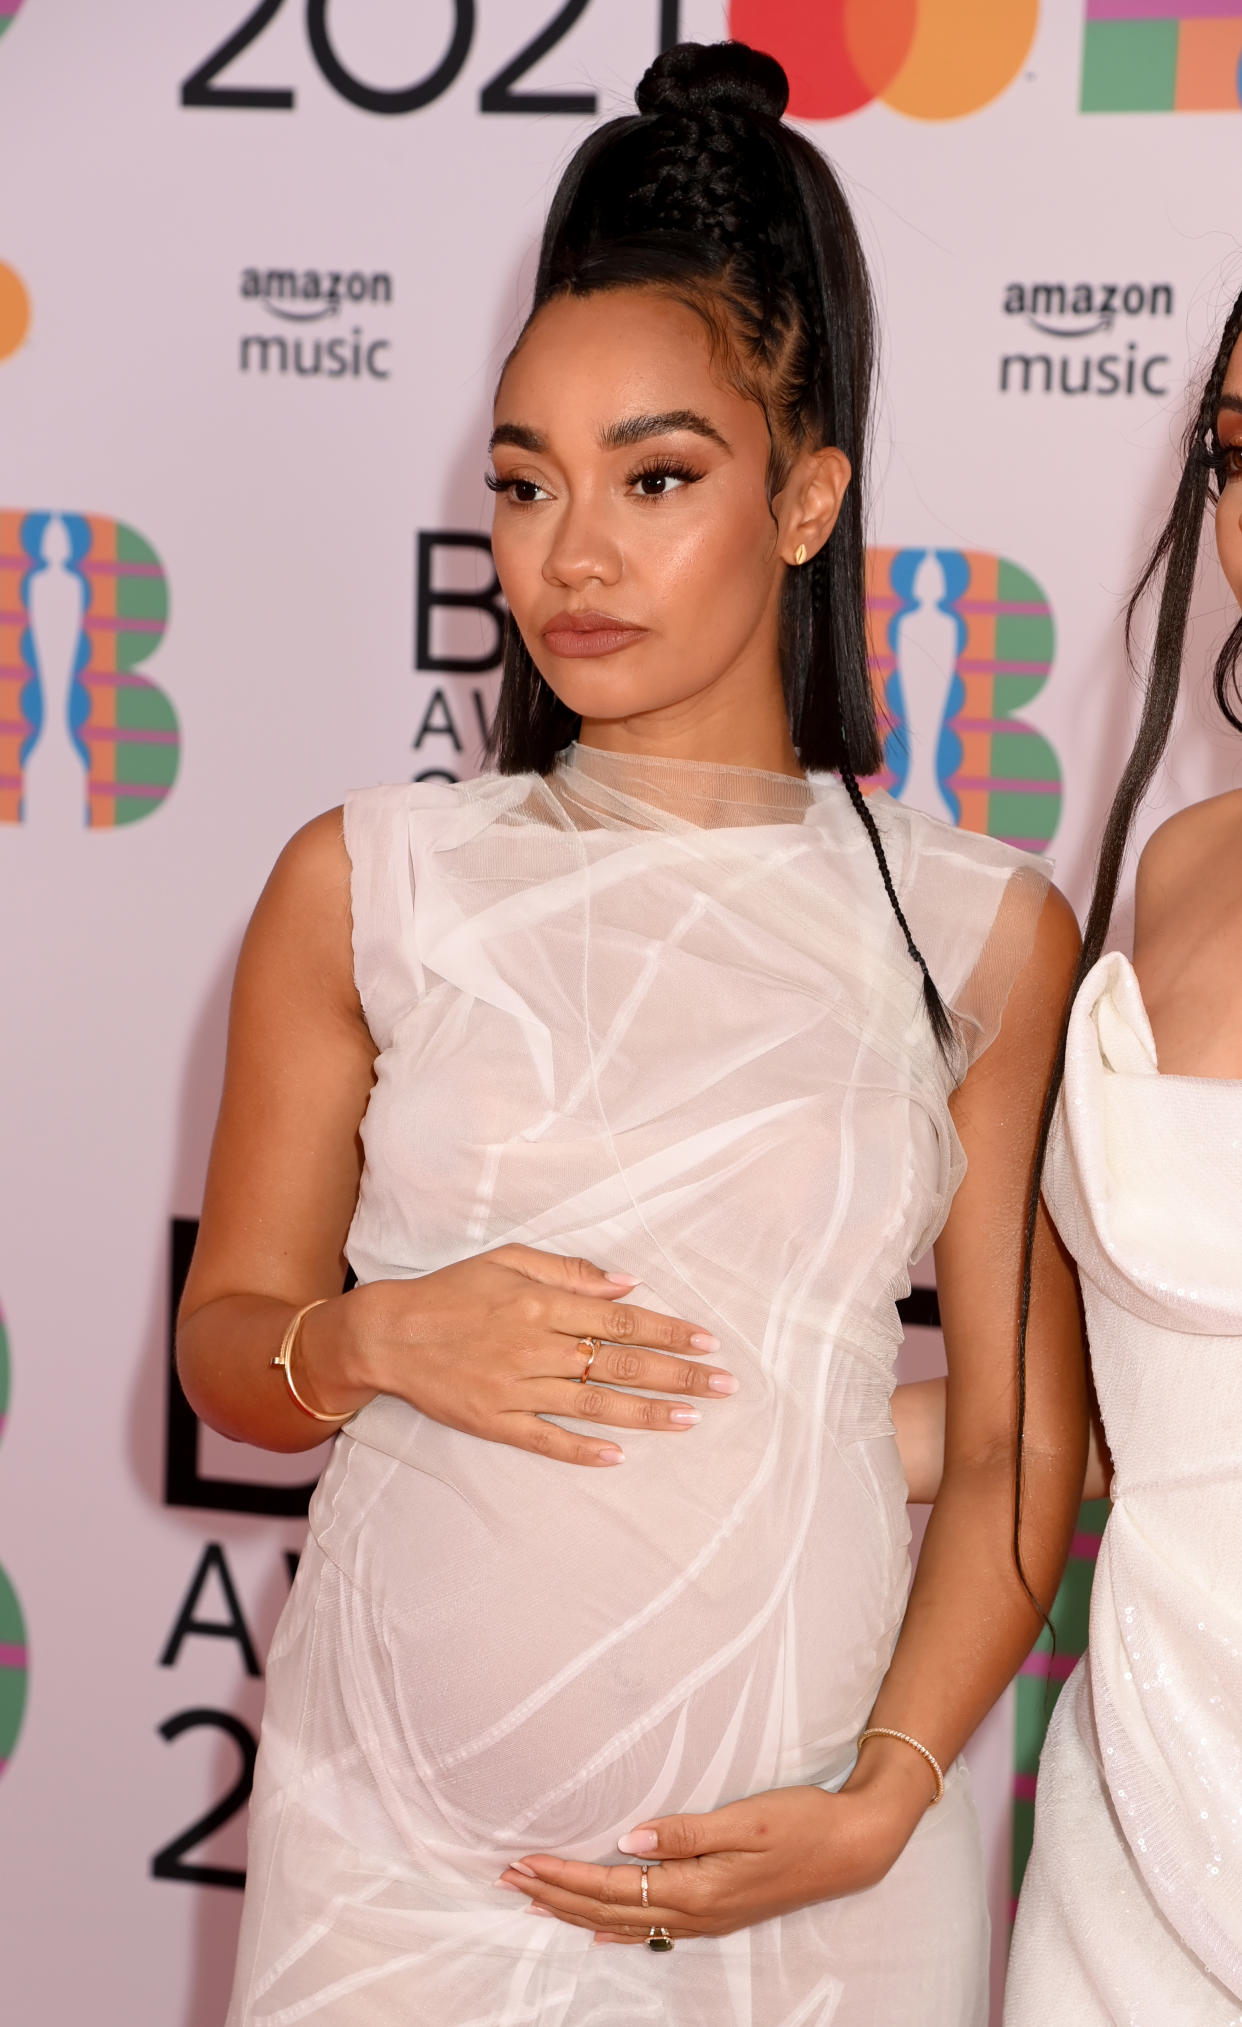 LONDON, ENGLAND - MAY 11: Leigh-Anne Pinnock of Little Mix attends The BRIT Awards 2021 at The O2 Arena on May 11, 2021 in London, England. (Photo by Dave J Hogan/Getty Images)